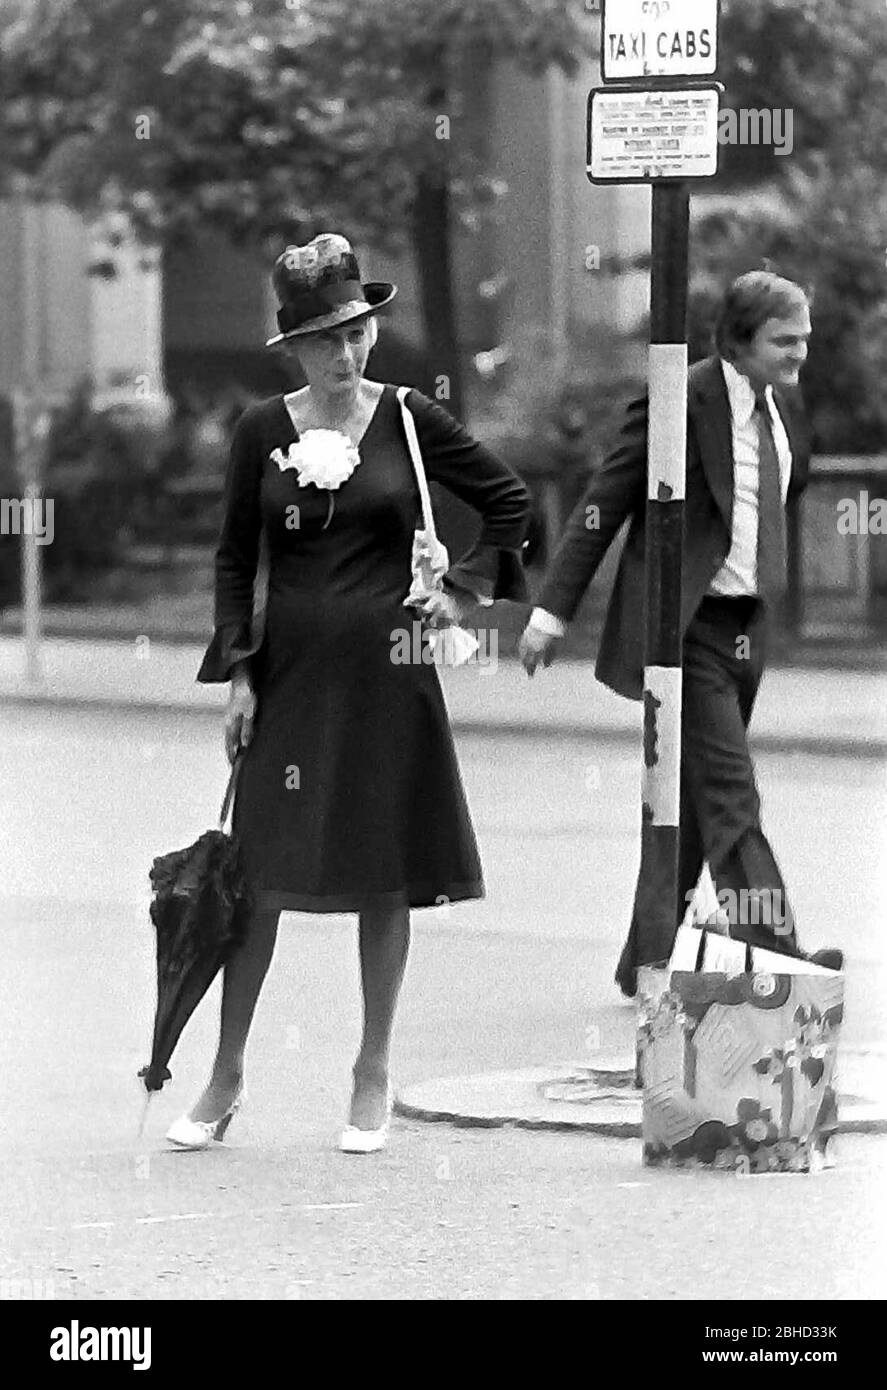 Daily life on the streets in Manchester, England, United Kingdom in 1974. A smartly dressed woman waits for a taxi at a taxi stand. Stock Photo